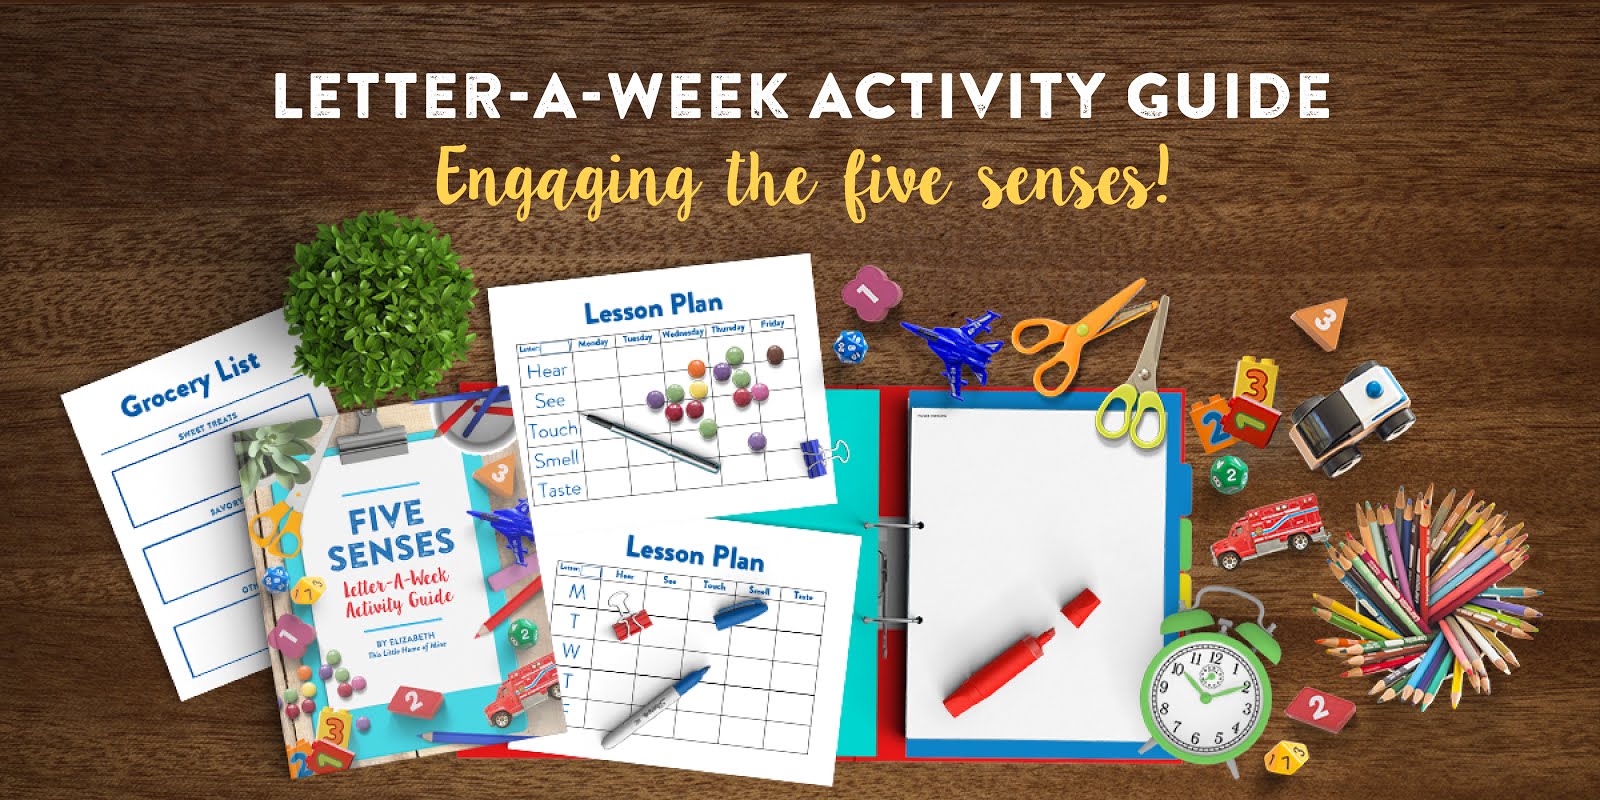 Recommended Reading: Letter-a-Week Activity Guide